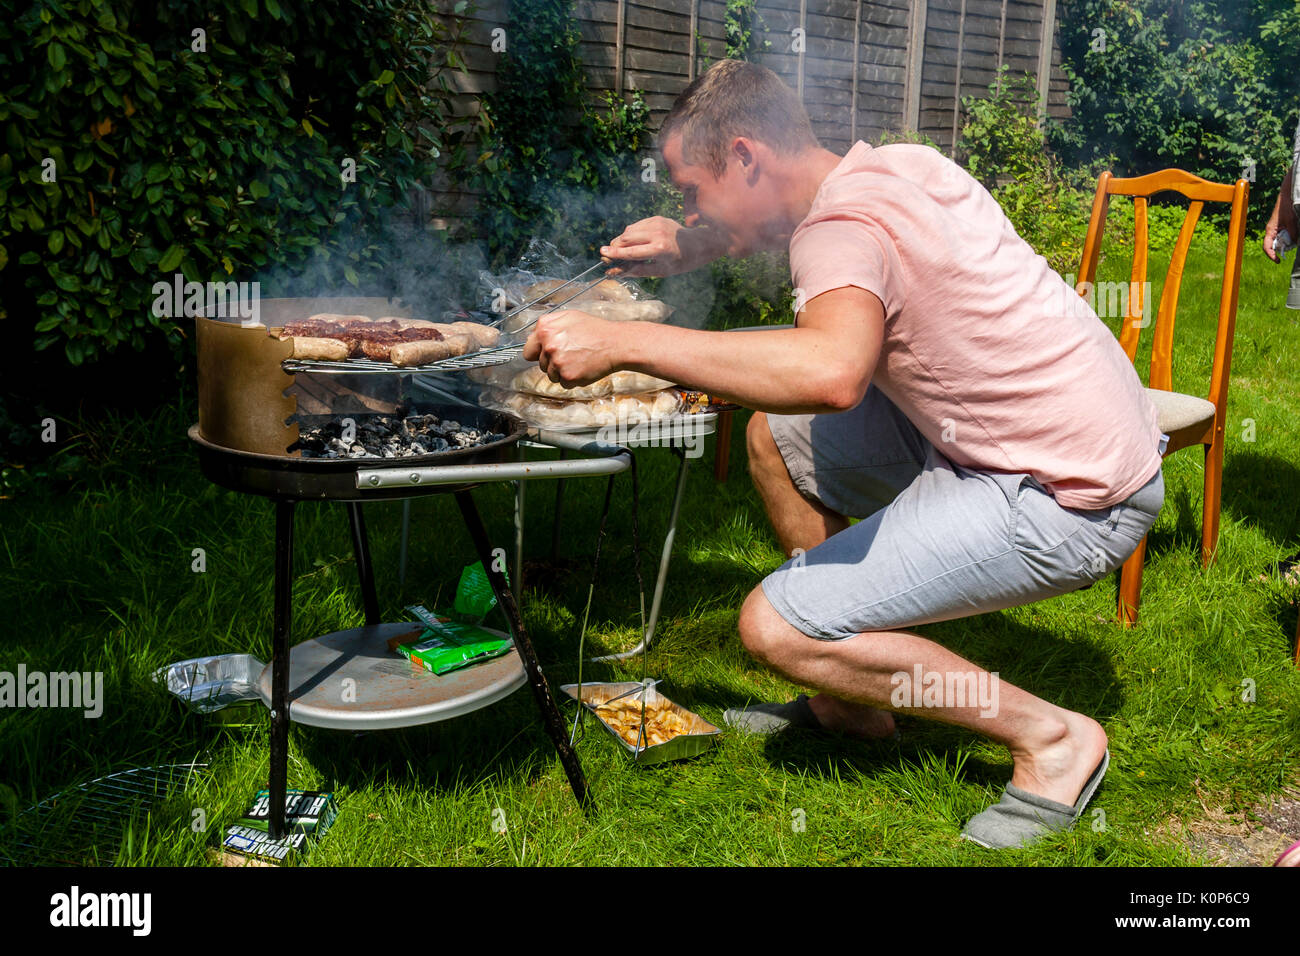 A Young Man Cooking Food On A Barbecue, Sussex, UK Stock Photo